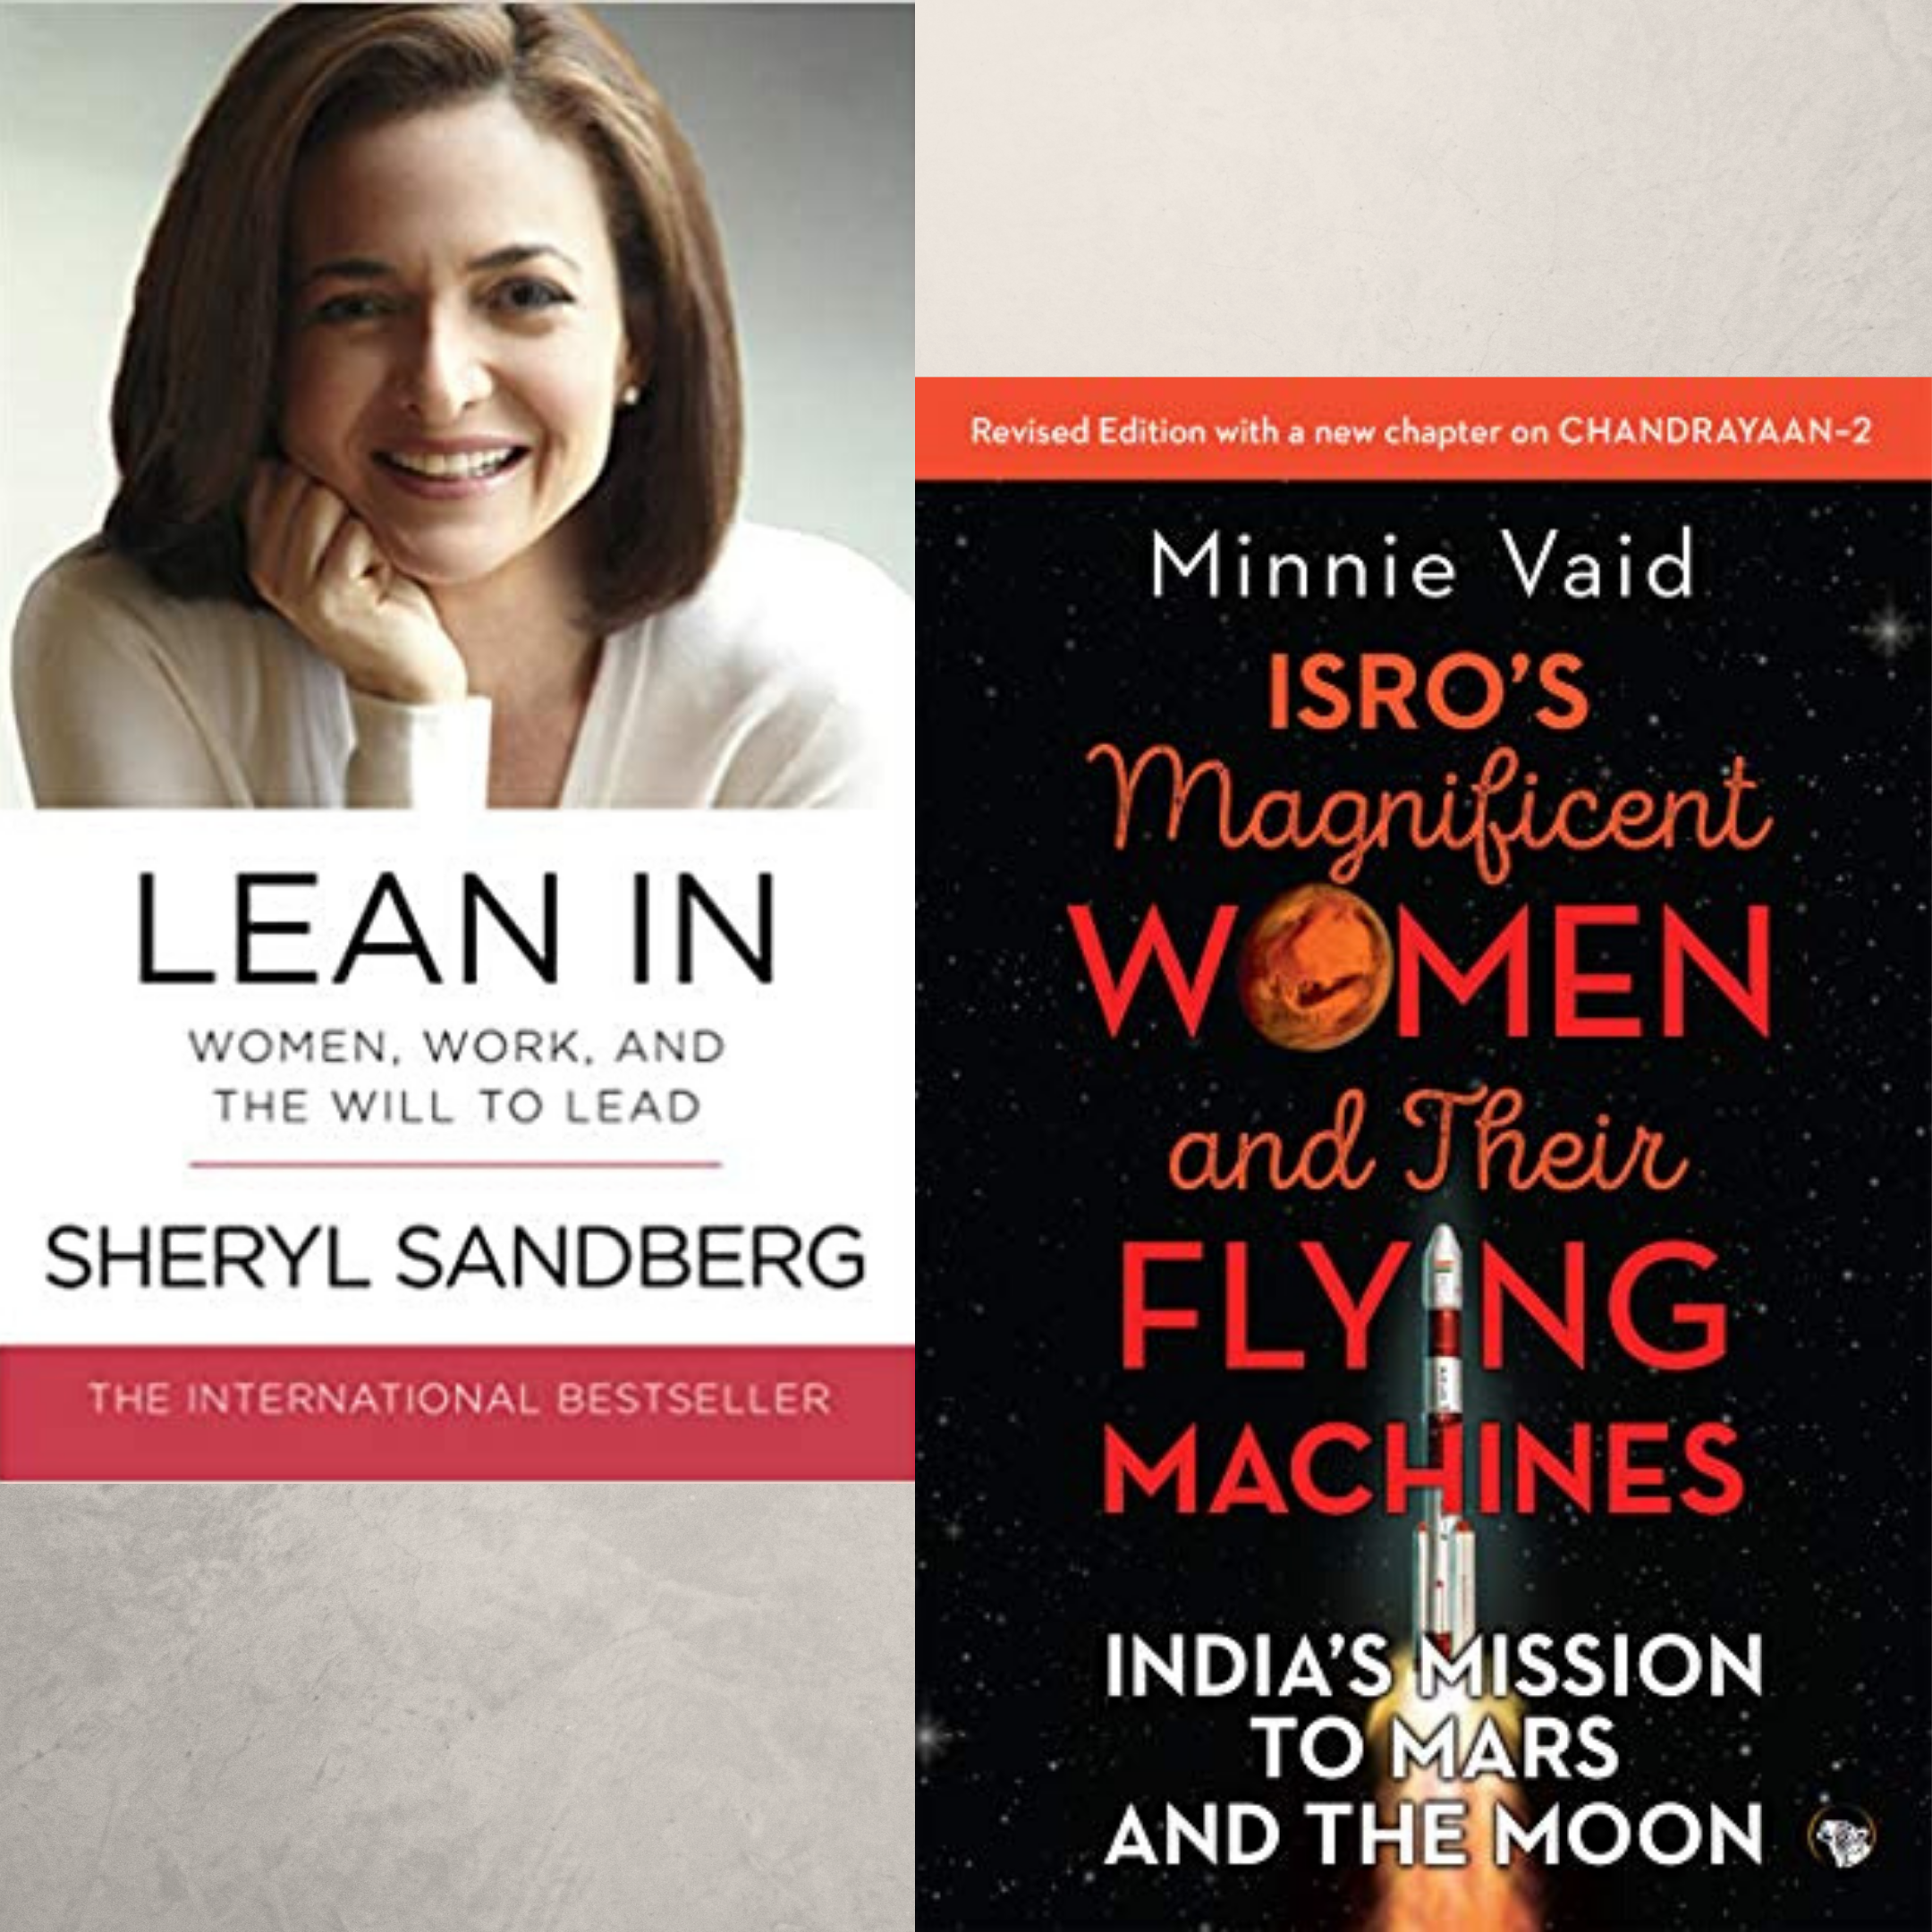 The ever-elusive work-life balance for women is a universal issue, and many books explore the its dynamics. Here, we look at Lean In, a classic by Sheryl Sandberg and compare it with the lessons we can learn from women scientists at ISRO. Unlikely contenders? Well, read on to see….